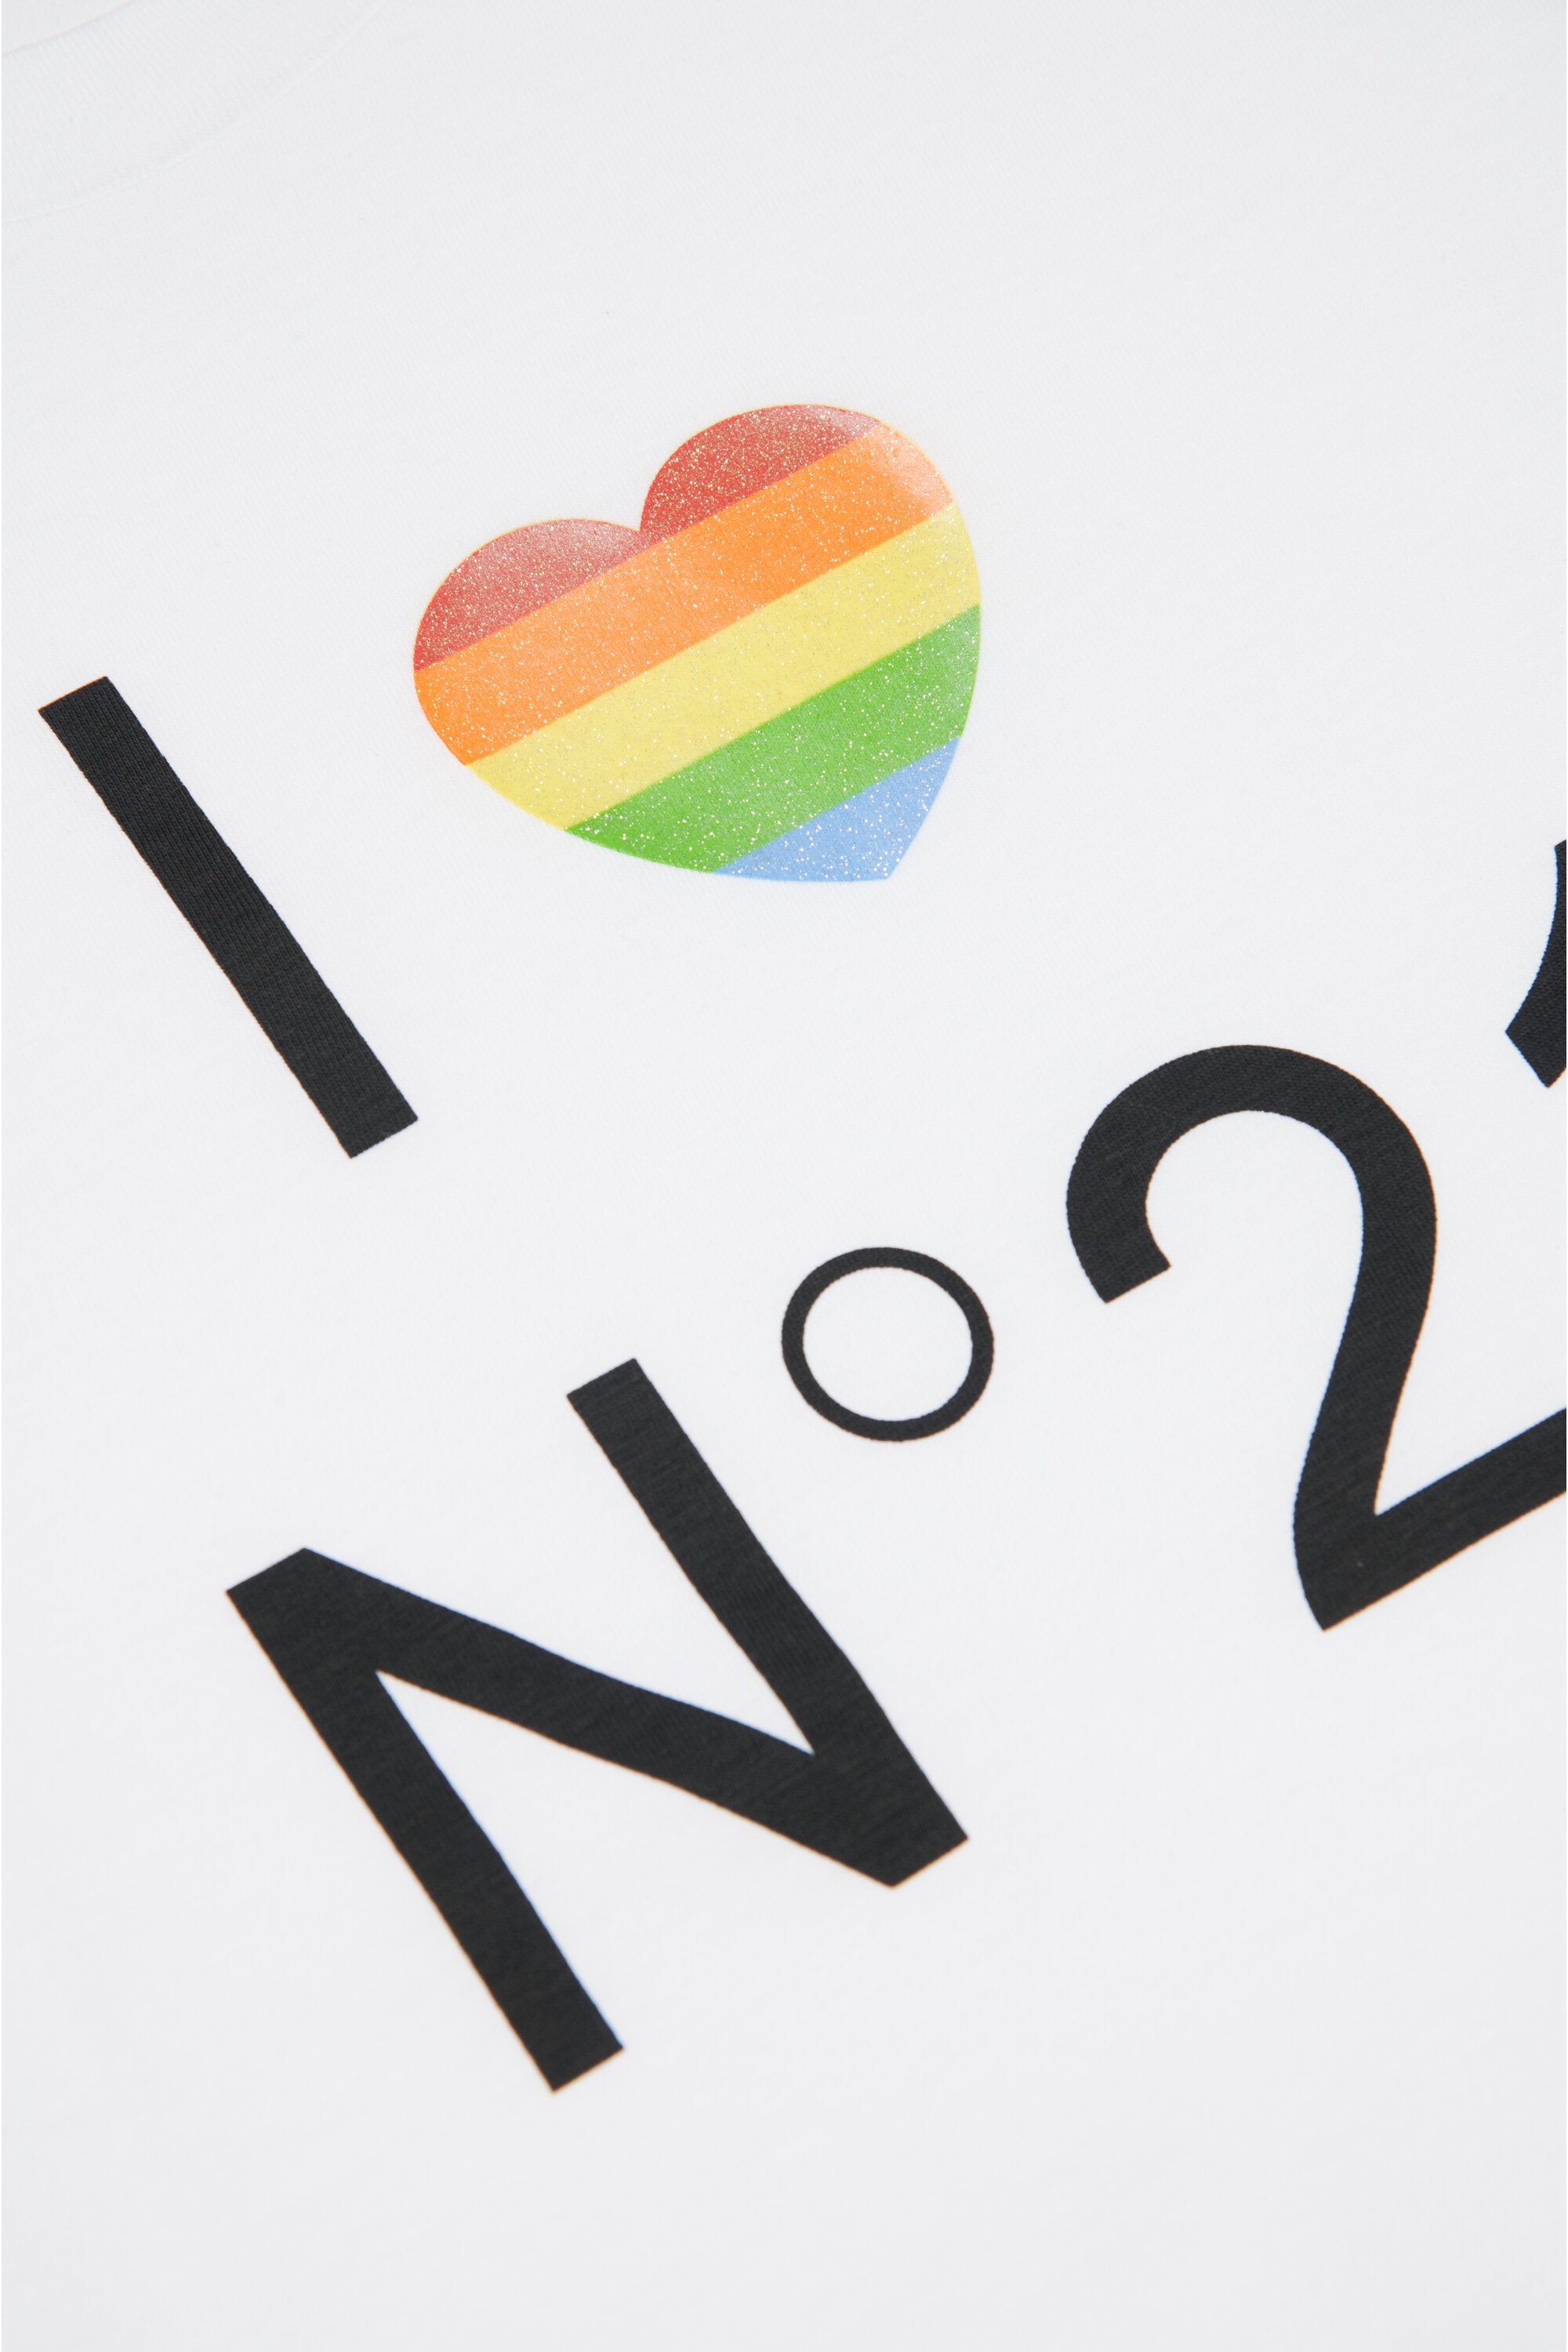 T-shirt branded with I Love N°21 logo